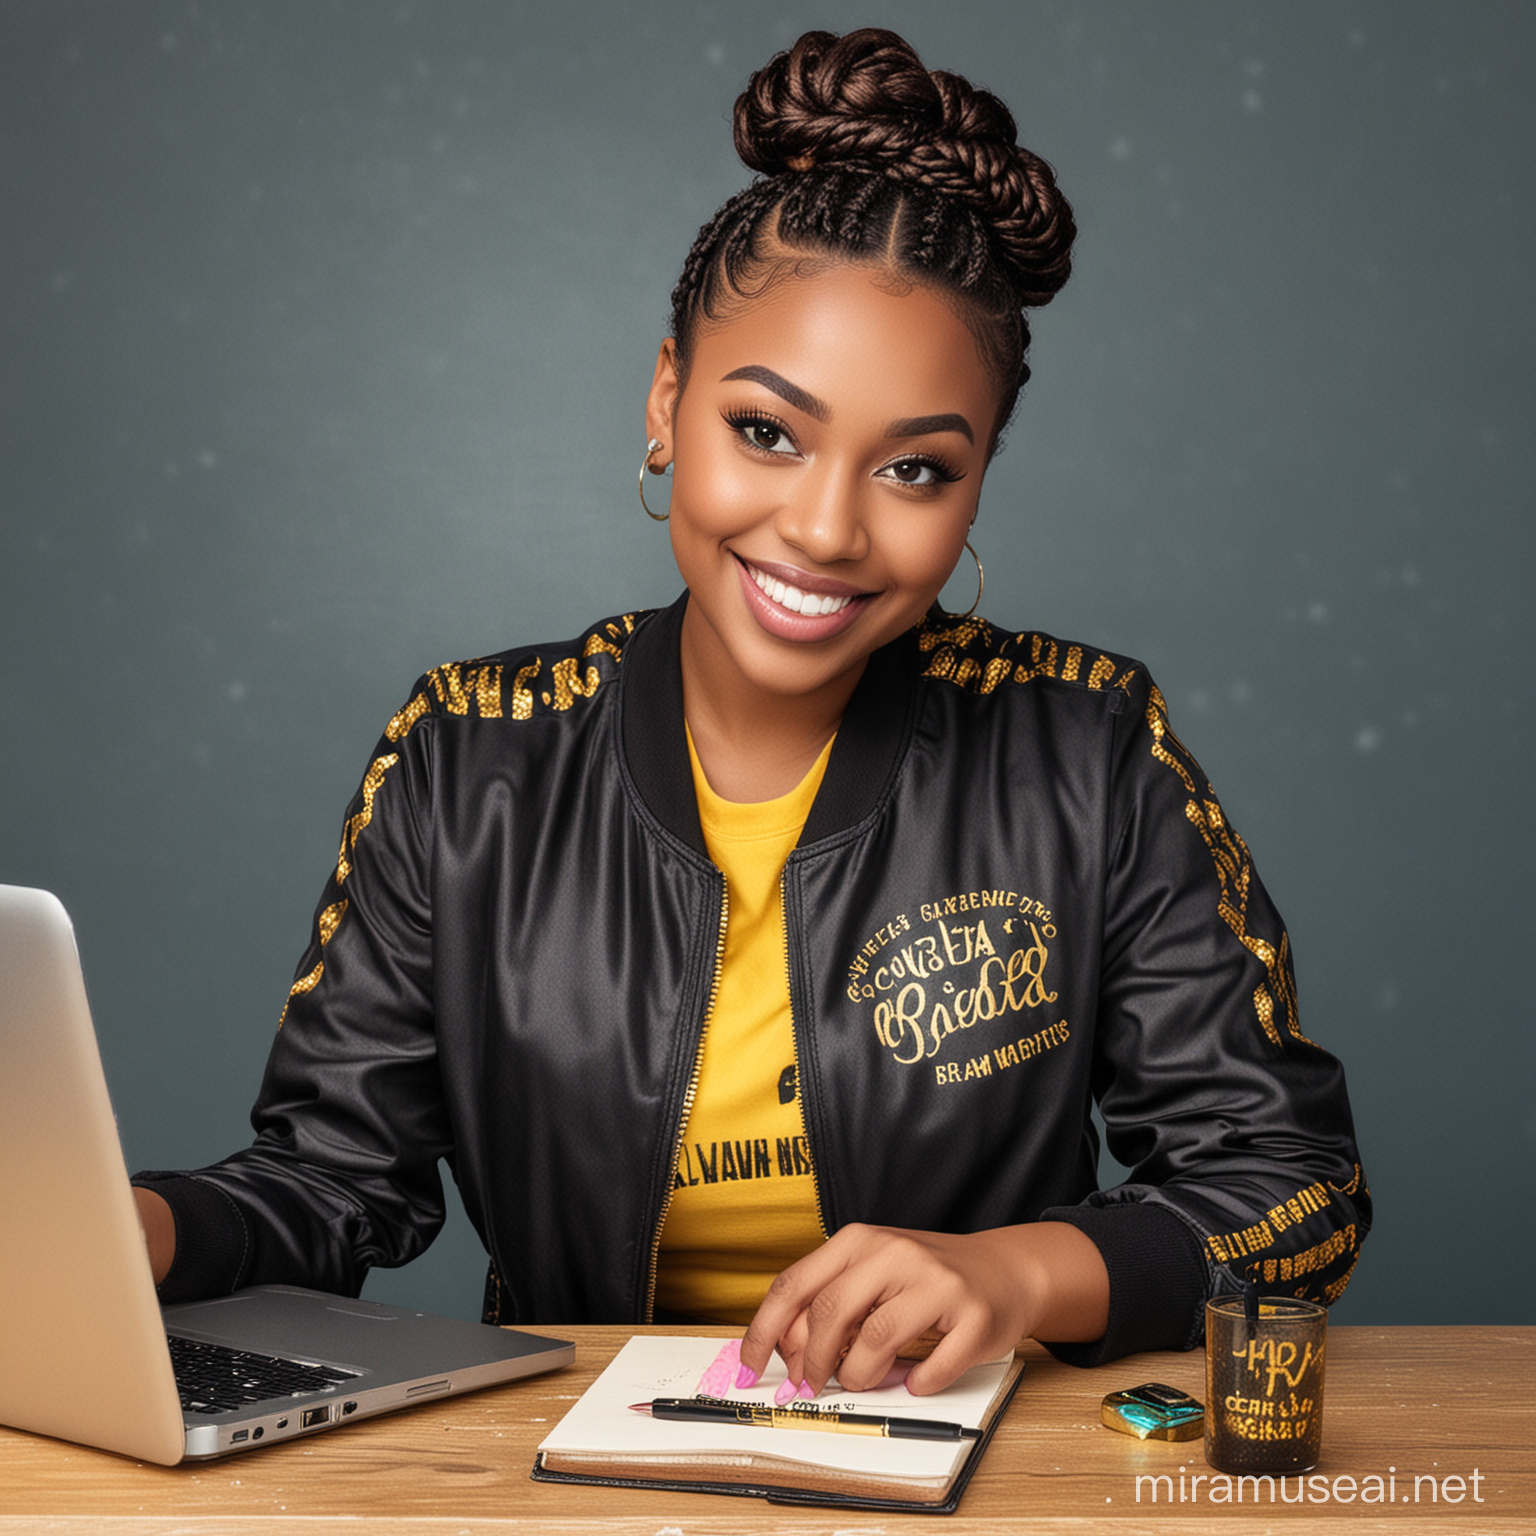 Smiling Curvy Woman with Braided Bun Hairstyle and Varsity Jacket by Glitter Blue Desk